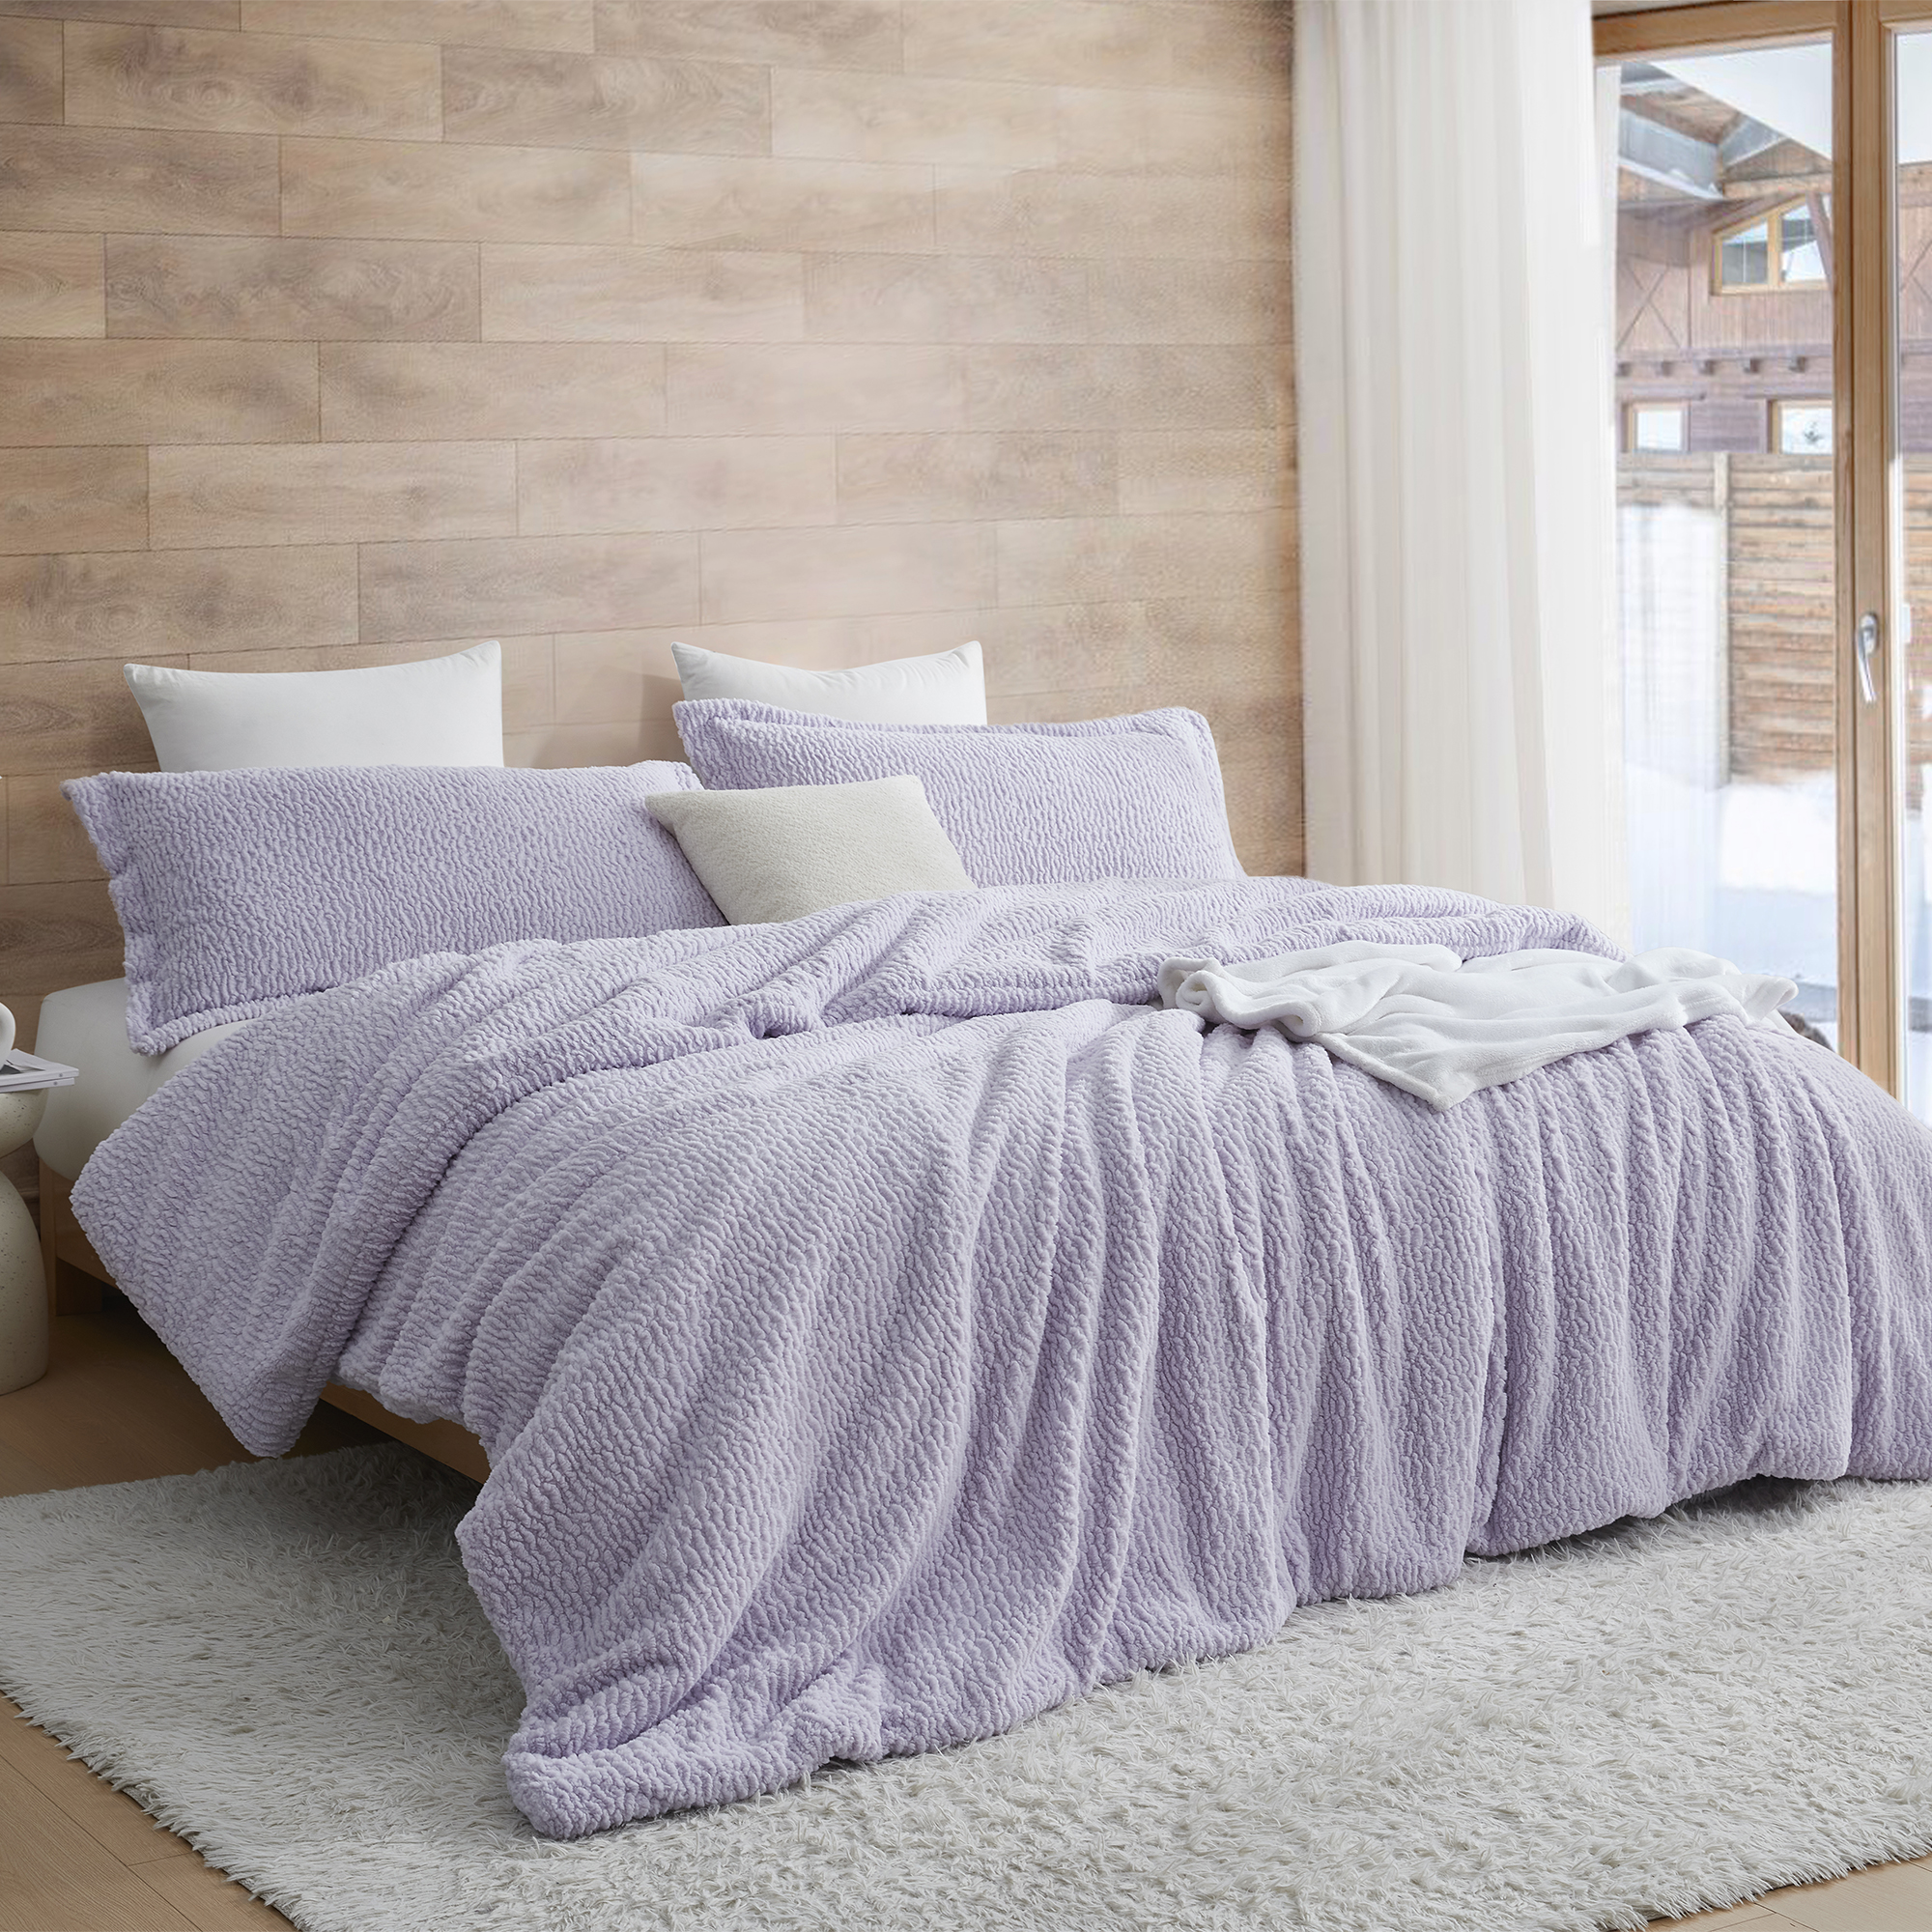 Cloud Cover - Coma Inducer® Oversized Comforter - Calm Lavender